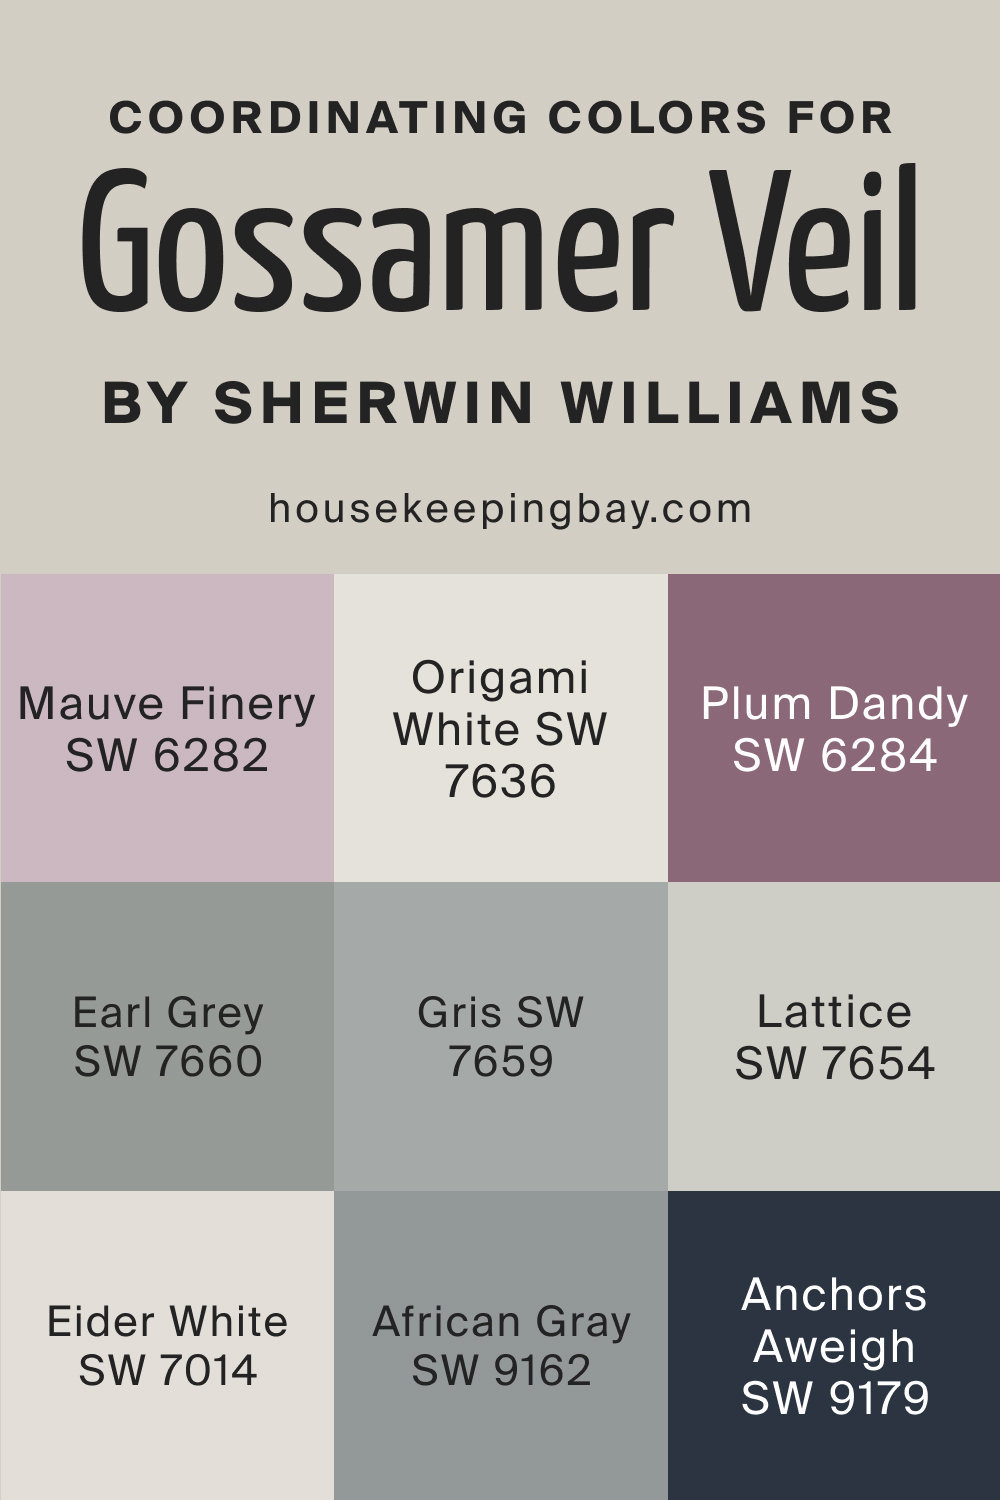 Coordinating Colors for SW Gossamer Veil by Sherwin Williams